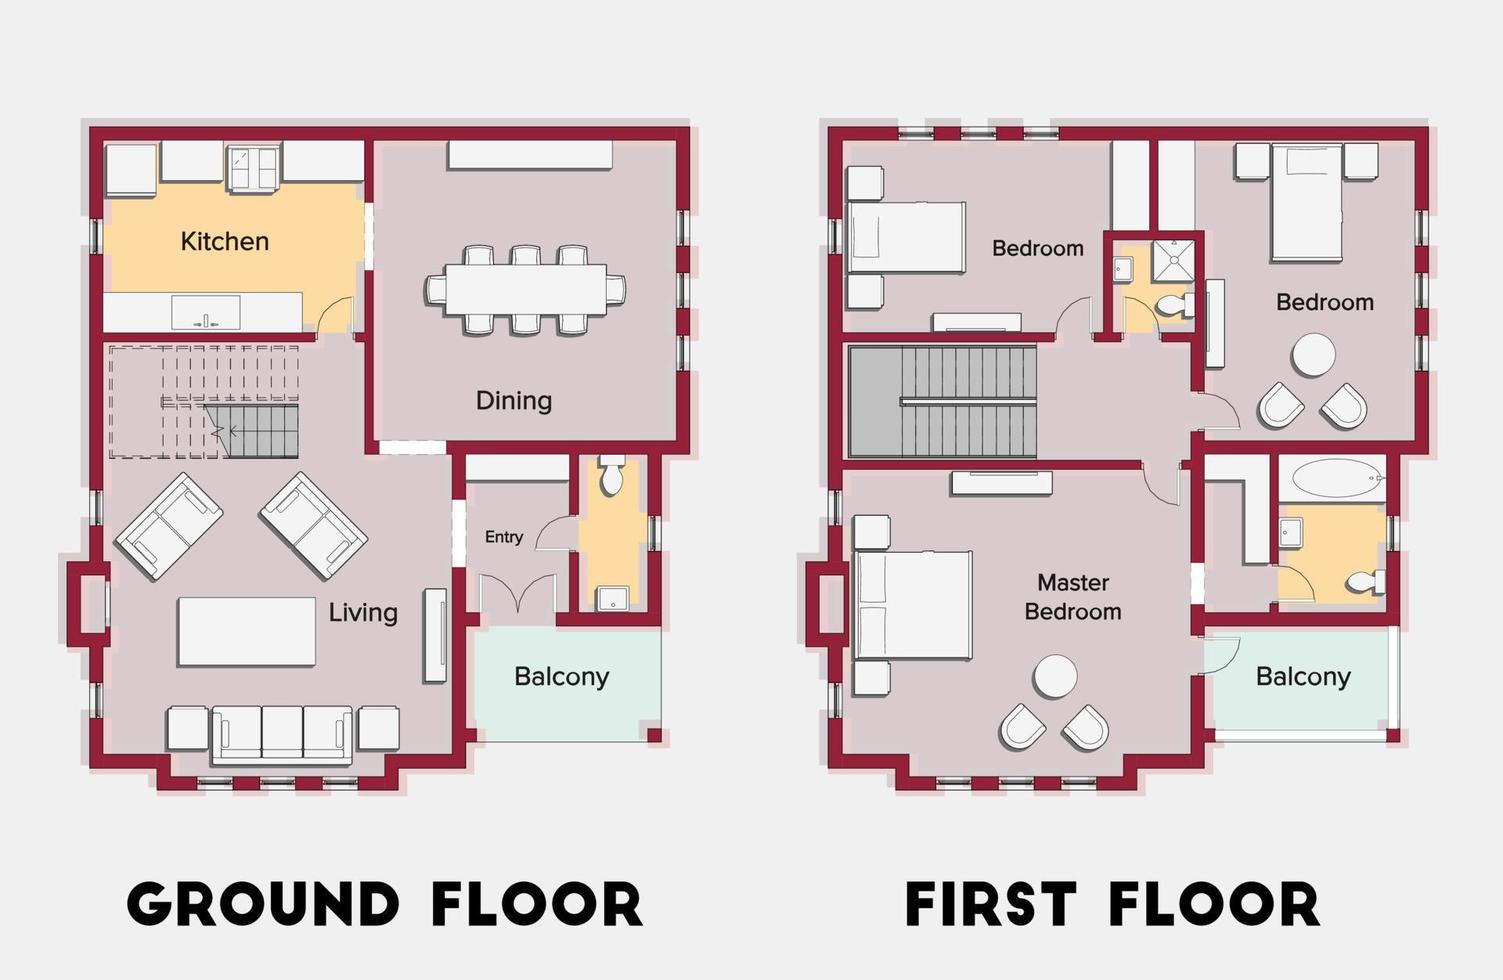 Architectural Color Floor Plan For Two floor Home Three Bedrooms. vector